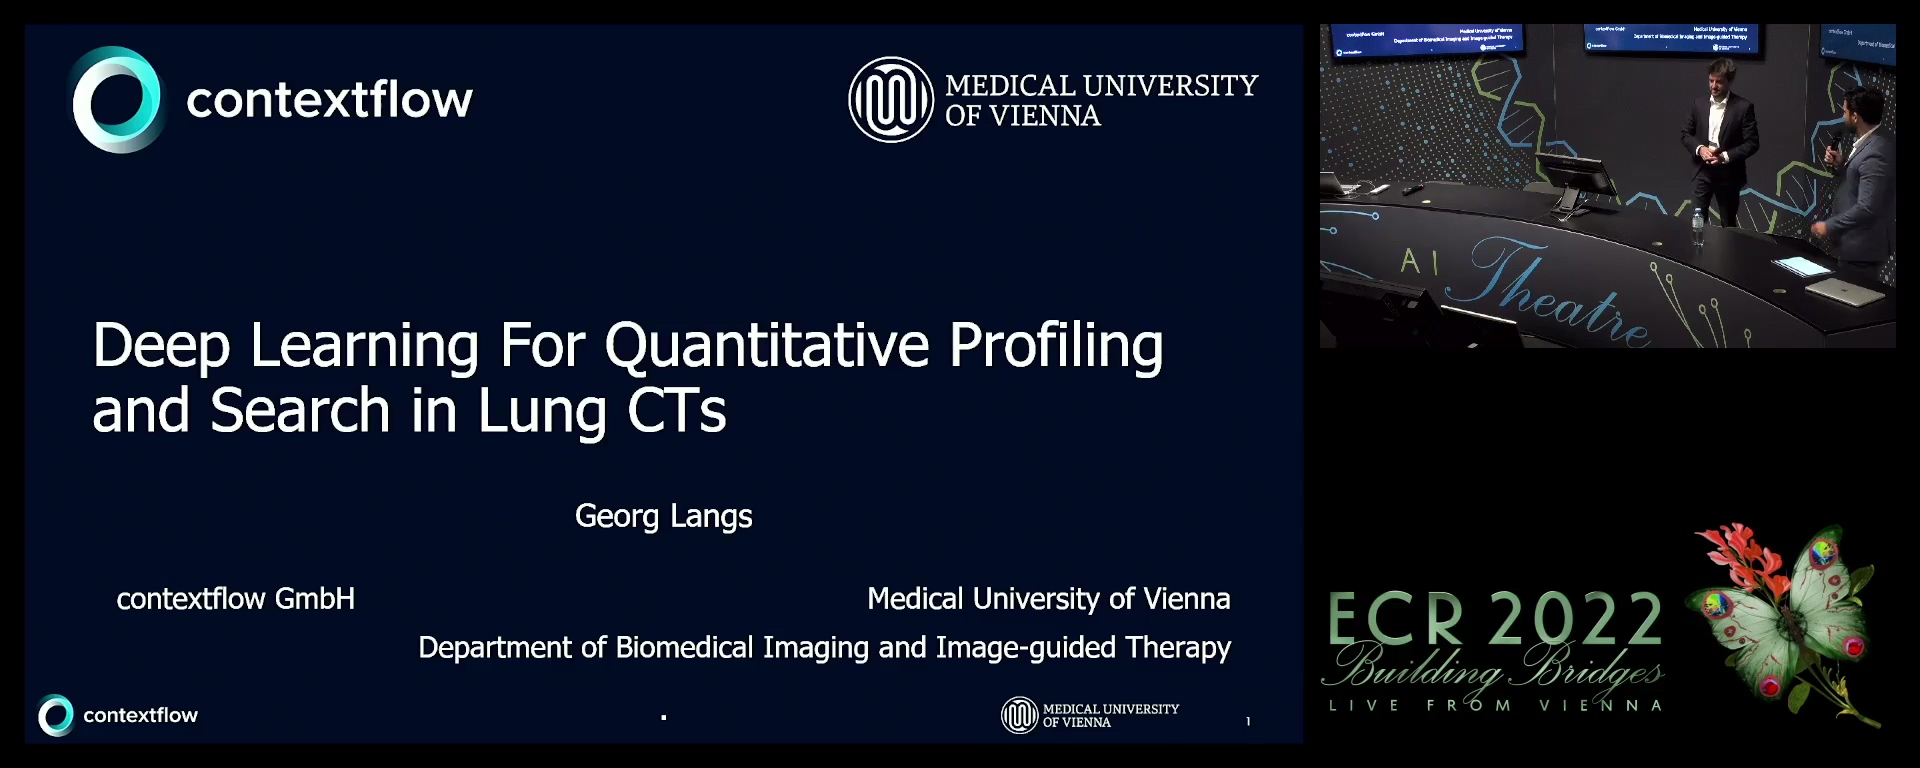 Deep learning for for quantitative profiling and search in lung CTs